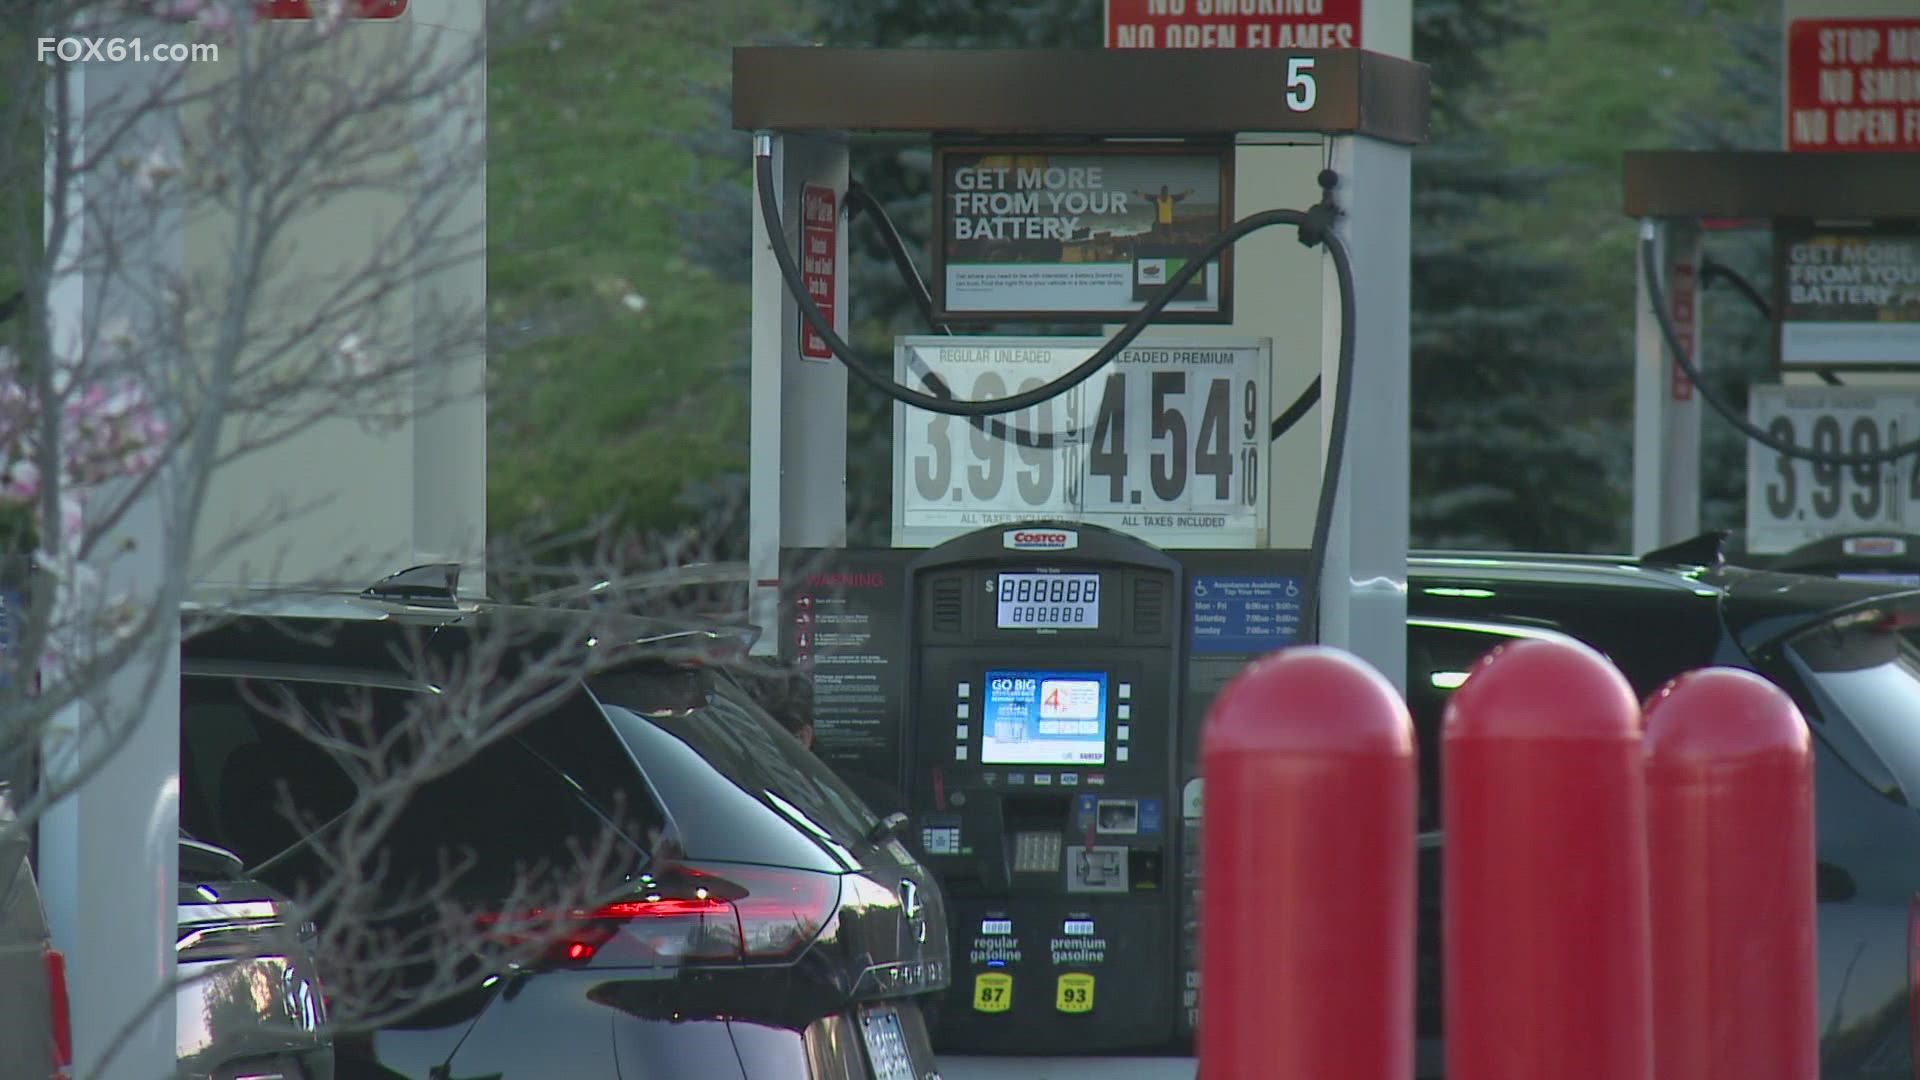 With the summer months ahead, experts say people should prepare for gas prices to go up even more